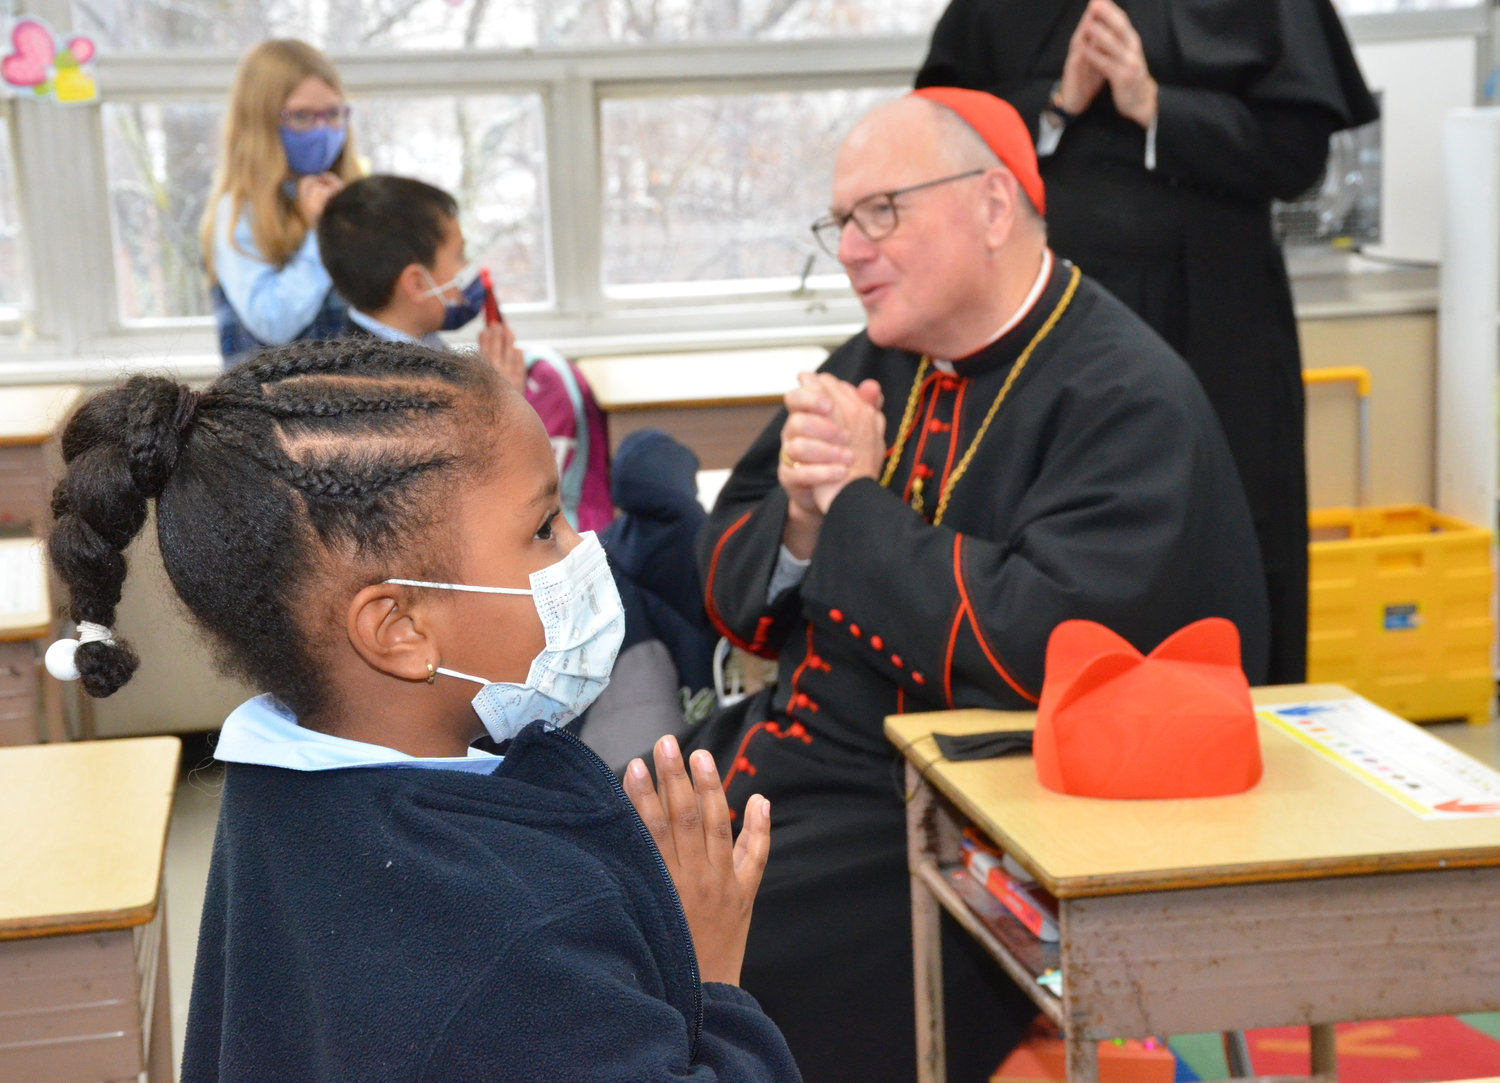 Cardinal Dolan prays with students at Holy Trinity School Annex at St. Peter’s early childhood education center during Catholic Schools Week Feb. 3.